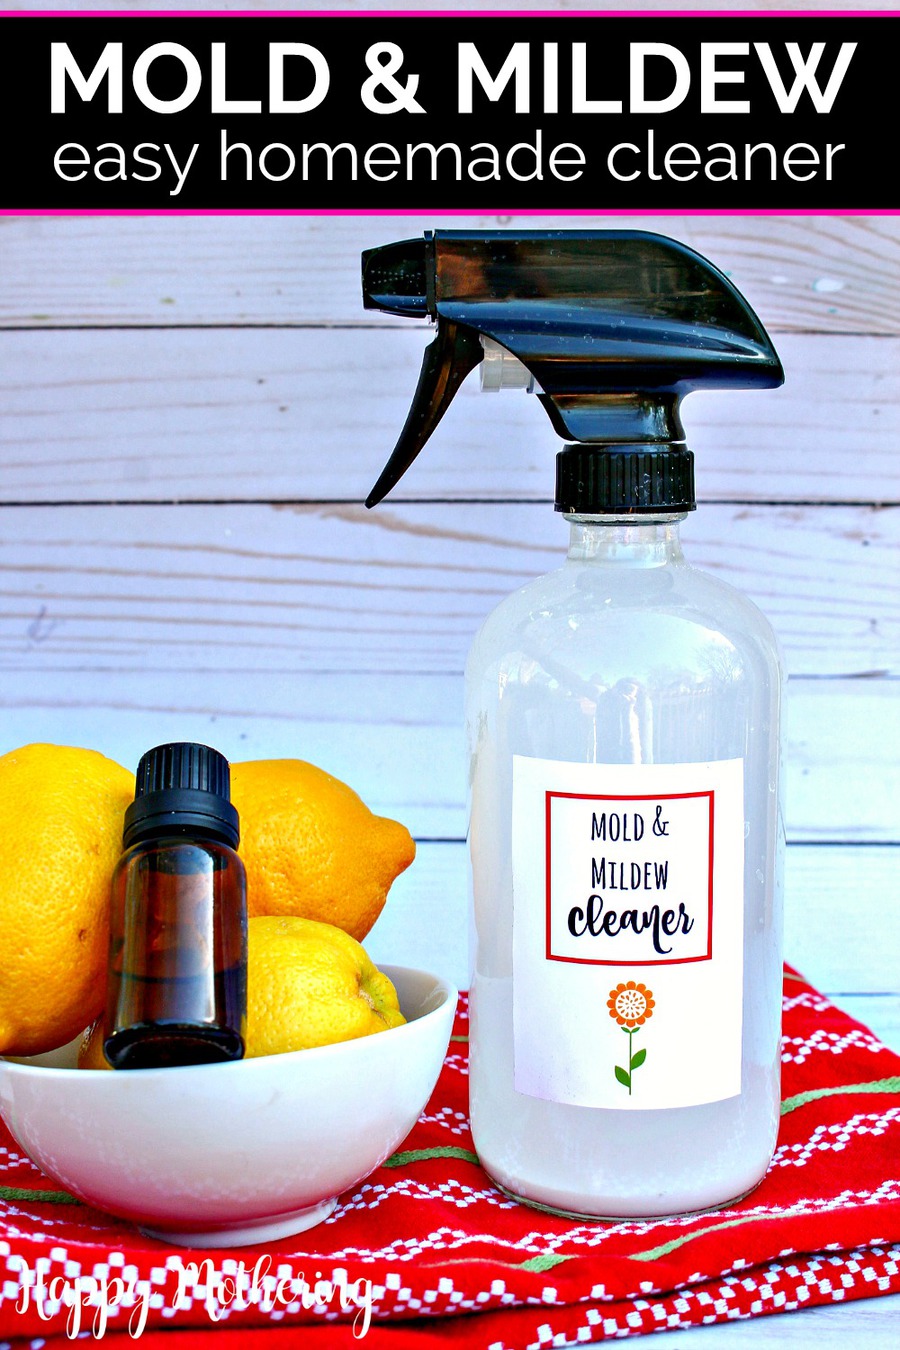 Do you have a bathroom that doesn't have great ventilation? This homemade mold and mildew cleaner is an easy DIY solution to prevent and clean away that yucky grime.